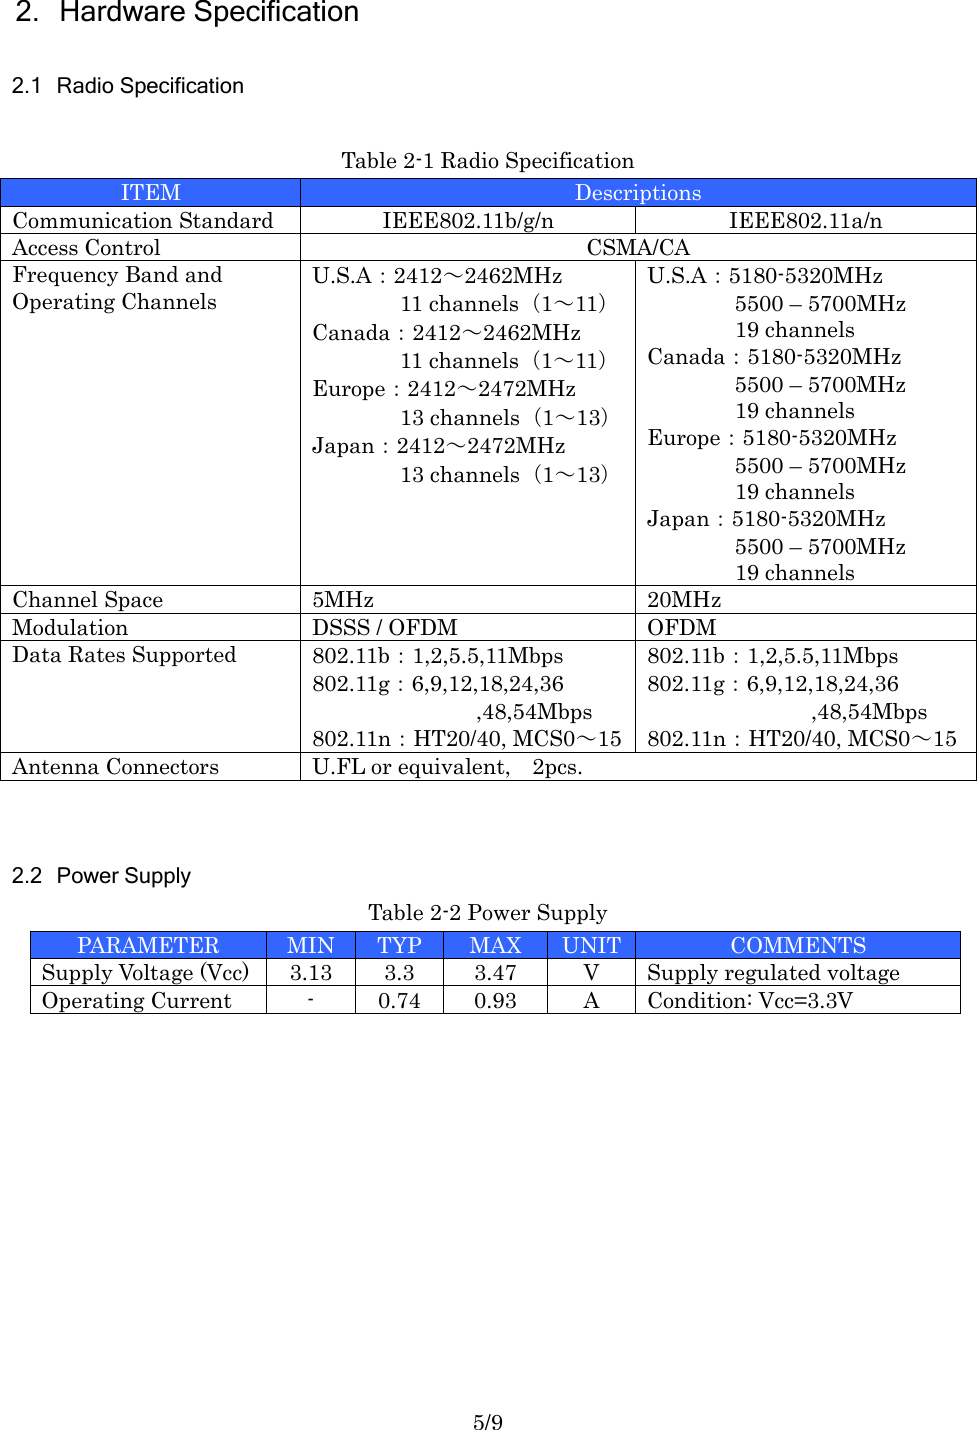 5/9 2. Hardware Specification    2.1 Radio Specification  Table 2-1 Radio Specification ITEM Descriptions Communication Standard IEEE802.11b/g/n IEEE802.11a/n Access Control CSMA/CA Frequency Band and   Operating Channels U.S.A：2412～2462MHz         11 channels（1～11） Canada：2412～2462MHz         11 channels（1～11） Europe：2412～2472MHz         13 channels（1～13） Japan：2412～2472MHz         13 channels（1～13） U.S.A：5180-5320MHz 5500 – 5700MHz         19 channels Canada：5180-5320MHz 5500 – 5700MHz         19 channels Europe：5180-5320MHz 5500 – 5700MHz         19 channels Japan：5180-5320MHz 5500 – 5700MHz         19 channels Channel Space 5MHz 20MHz Modulation DSSS / OFDM OFDM Data Rates Supported 802.11b：1,2,5.5,11Mbps 802.11g：6,9,12,18,24,36 ,48,54Mbps 802.11n：HT20/40, MCS0～15 802.11b：1,2,5.5,11Mbps 802.11g：6,9,12,18,24,36 ,48,54Mbps 802.11n：HT20/40, MCS0～15 Antenna Connectors U.FL or equivalent,    2pcs.     2.2 Power Supply Table 2-2 Power Supply   PARAMETER MIN TYP MAX UNIT COMMENTS Supply Voltage (Vcc) 3.13 3.3 3.47 V Supply regulated voltage Operating Current - 0.74 0.93 A Condition: Vcc=3.3V  